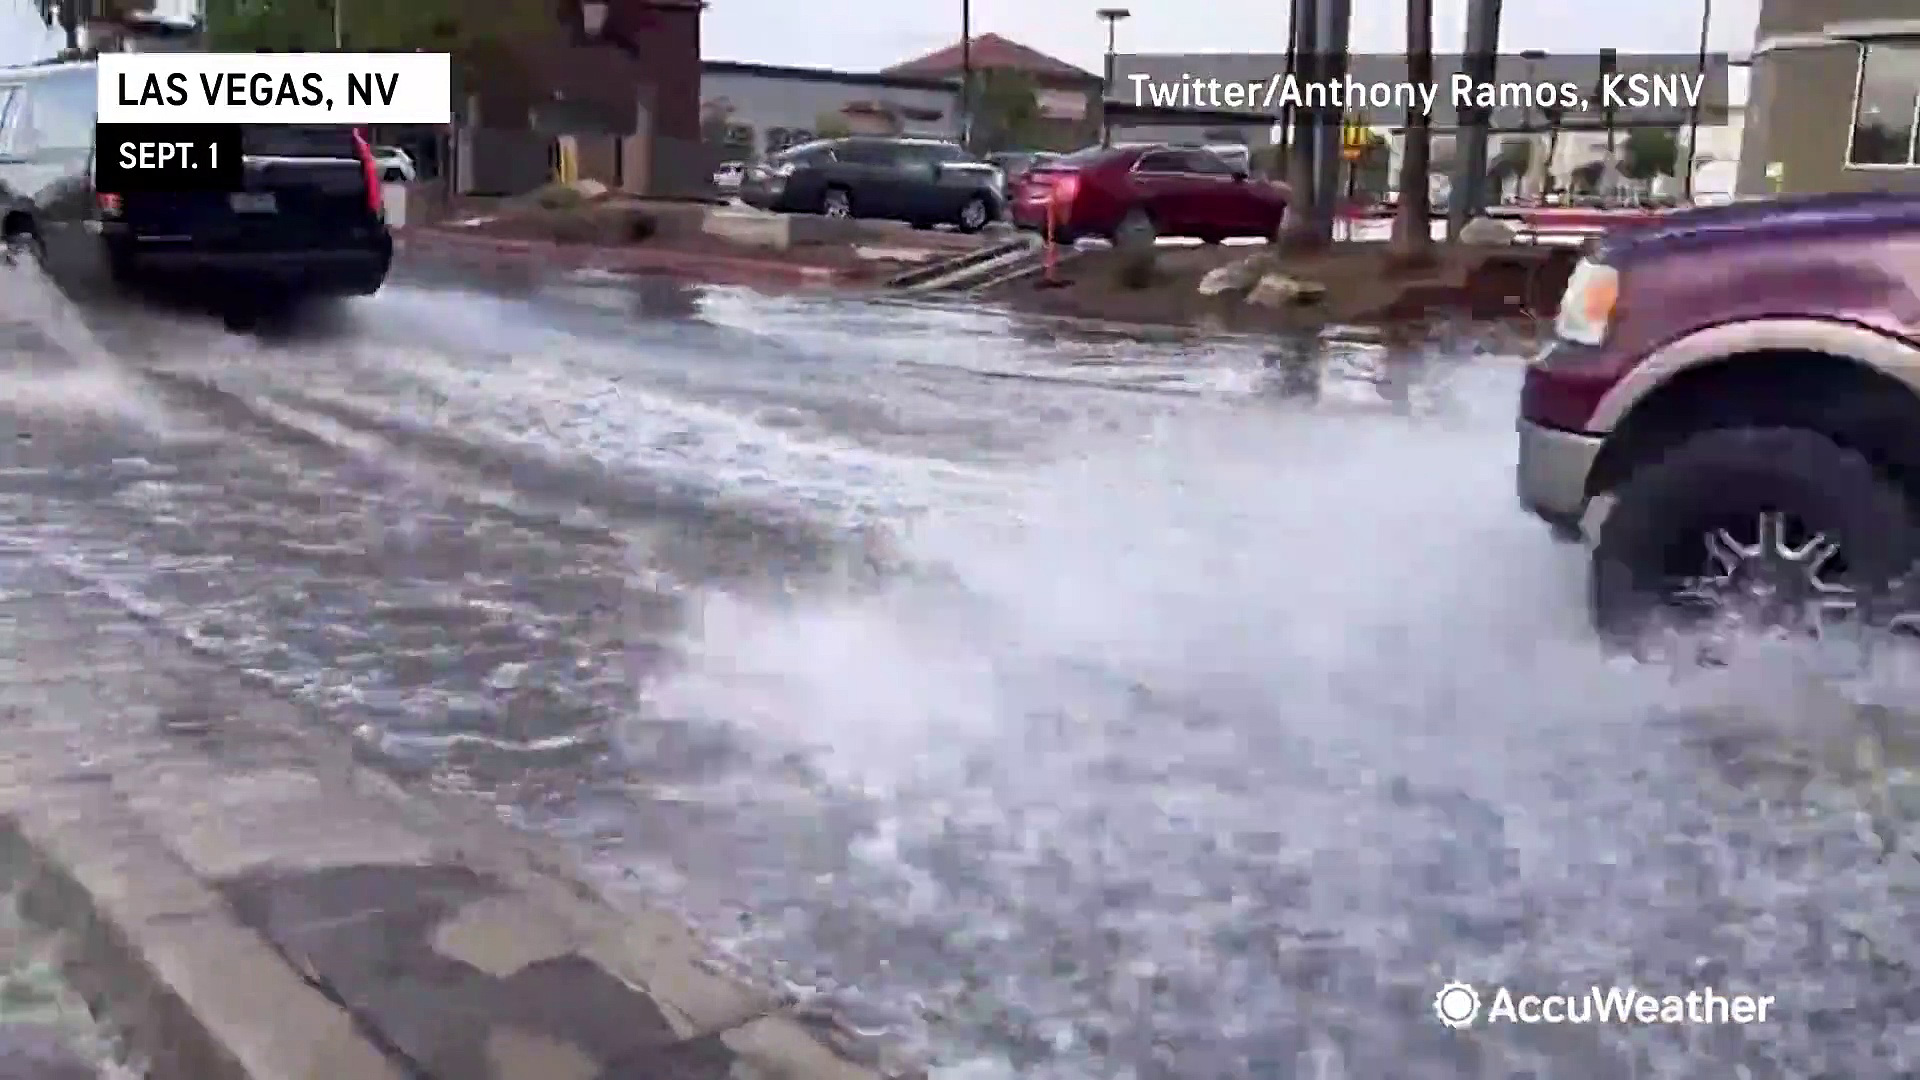 Flash floods turns busy Las Vegas streets into rivers